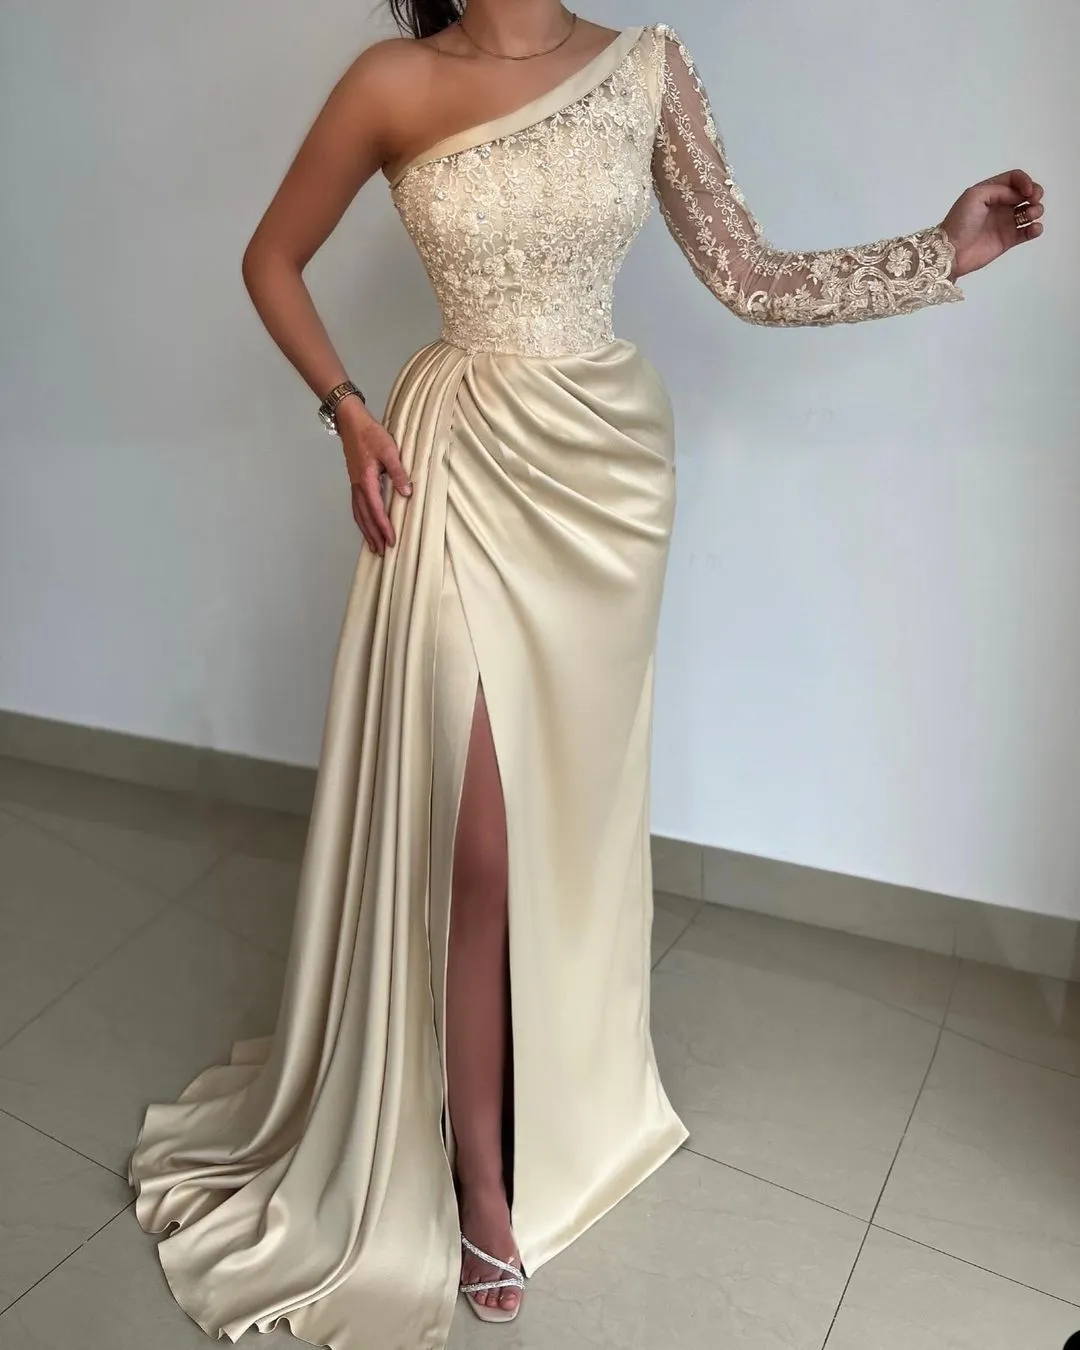 2023 Sexy Prom Dresses Champagne Lace Appliques Crystals Beads Illusion One Shoulder Evening Dress A Line Side Split Formal Party Gowns Long Sleeve